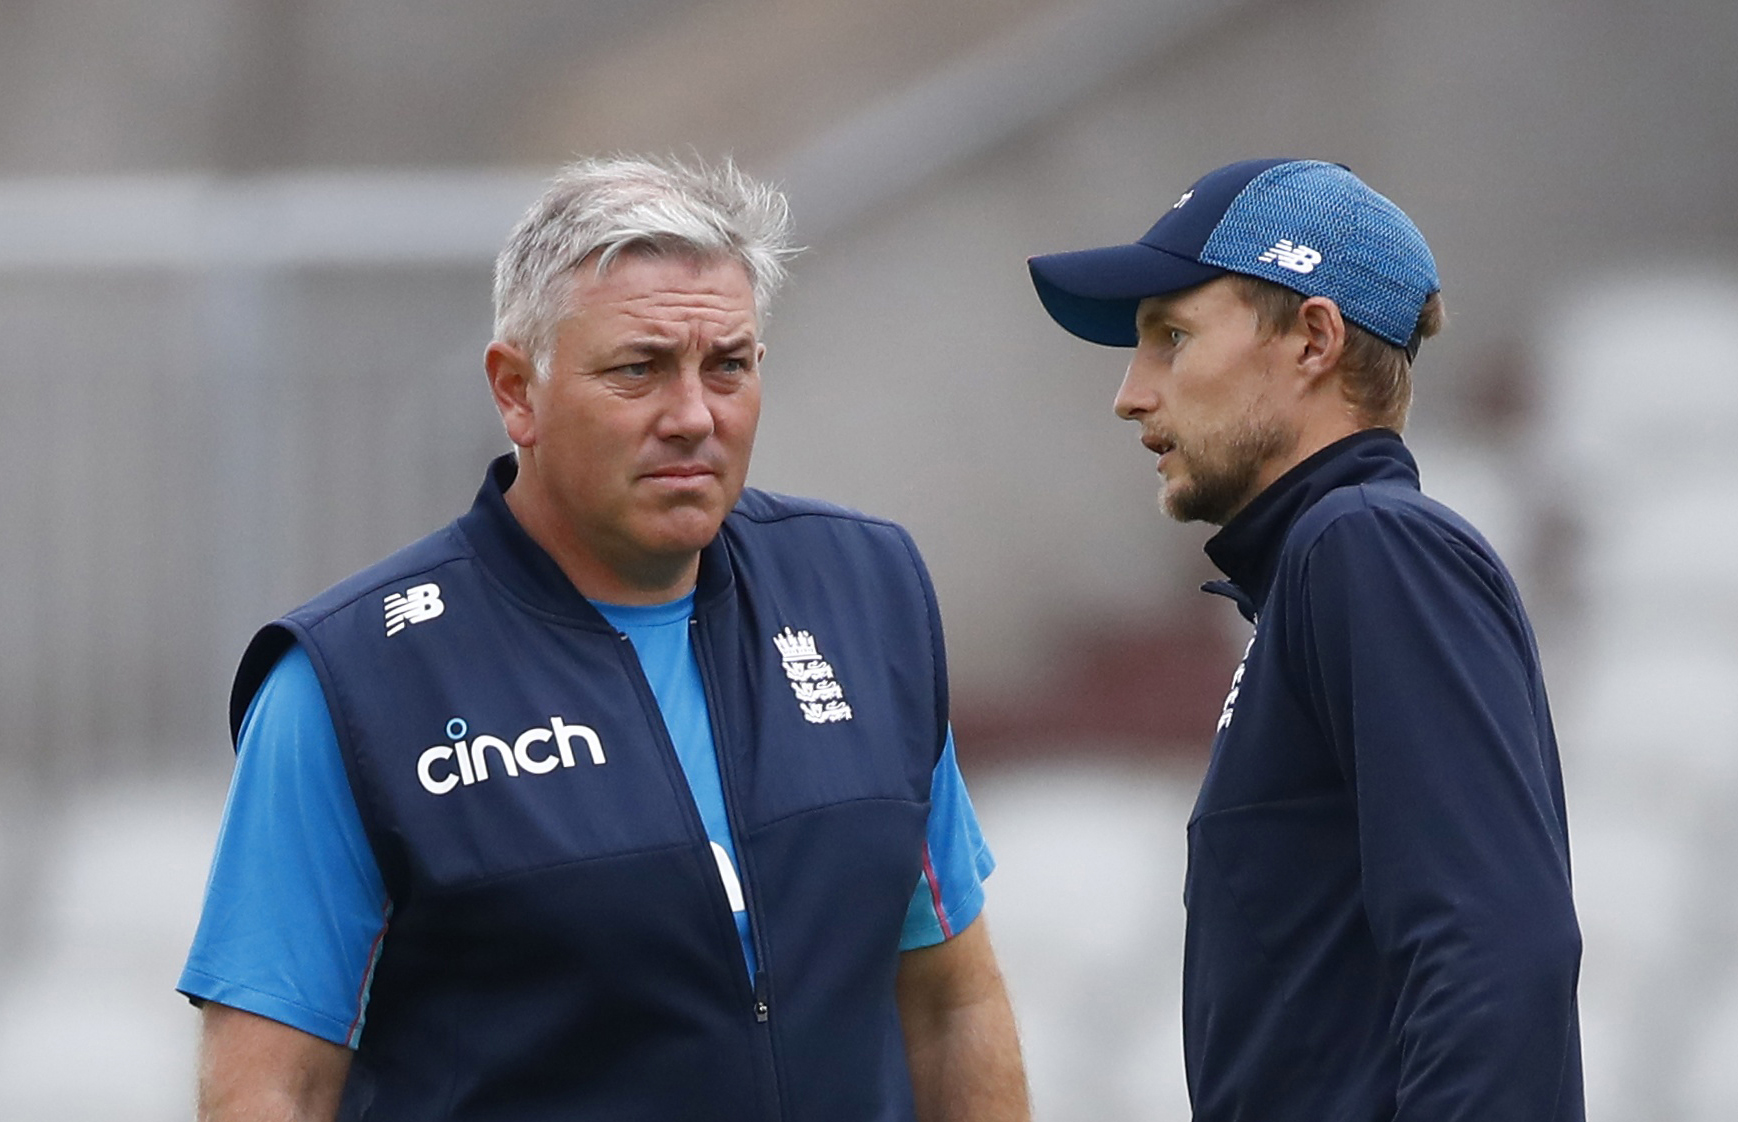 England need confidence boost after Ashes mauling: coach Silverwood | Reuters